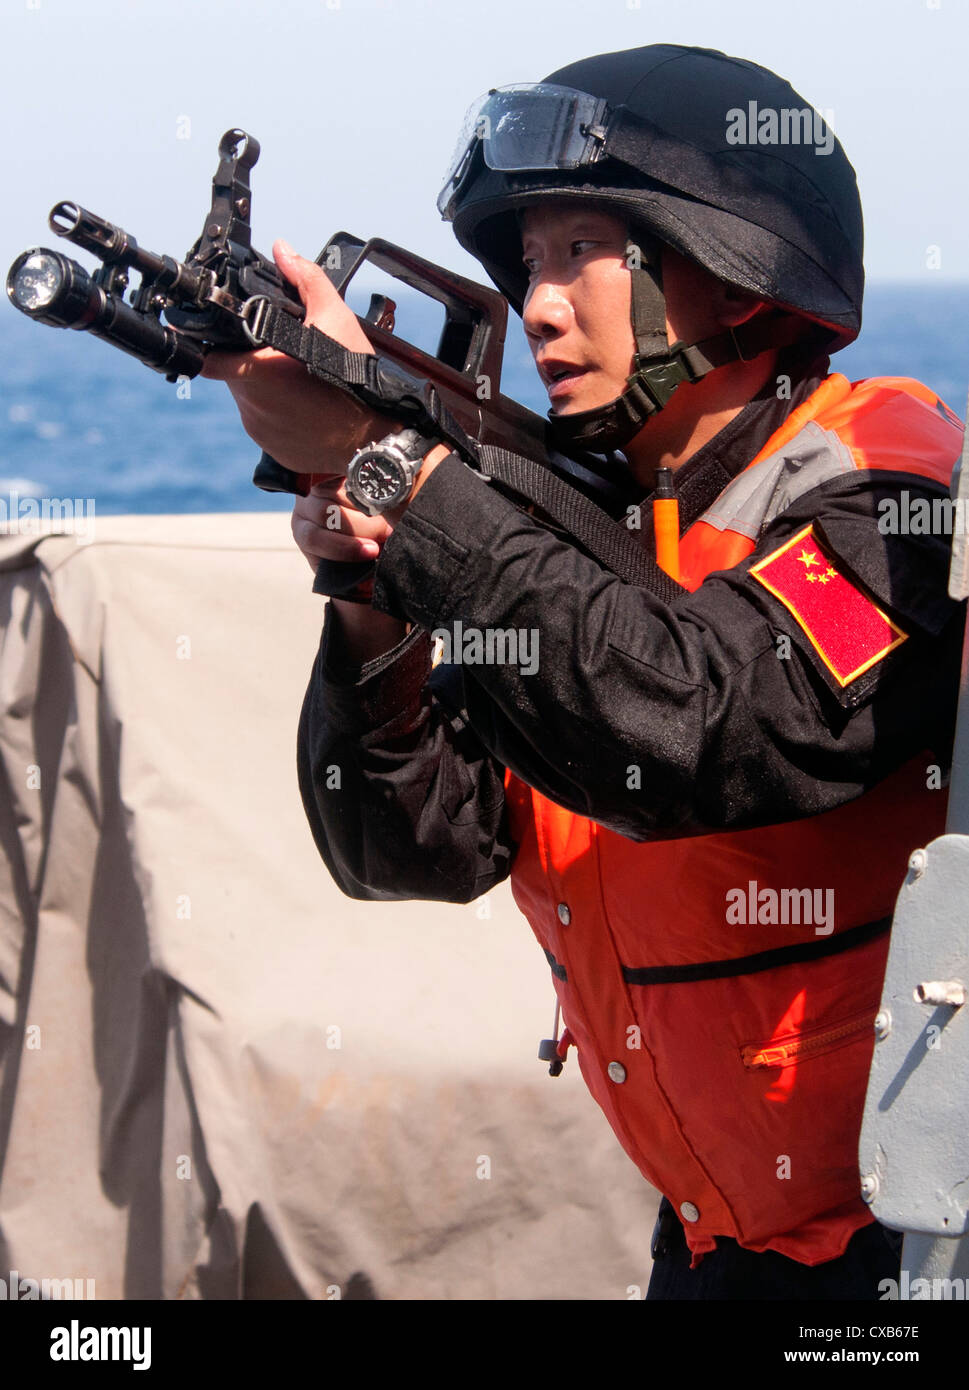 Chinese naval special forces team from the Chinese People's Liberation Army frigate Yi Yang participates in a bilateral counter-piracy exercise aboard guided-missile destroyer USS Winston S. Churchill September 17, 2012 in the Gulf of Aden. The focus of the exercise was American and Chinese naval cooperation in detecting, boarding, and searching suspected pirated vessels. Stock Photo